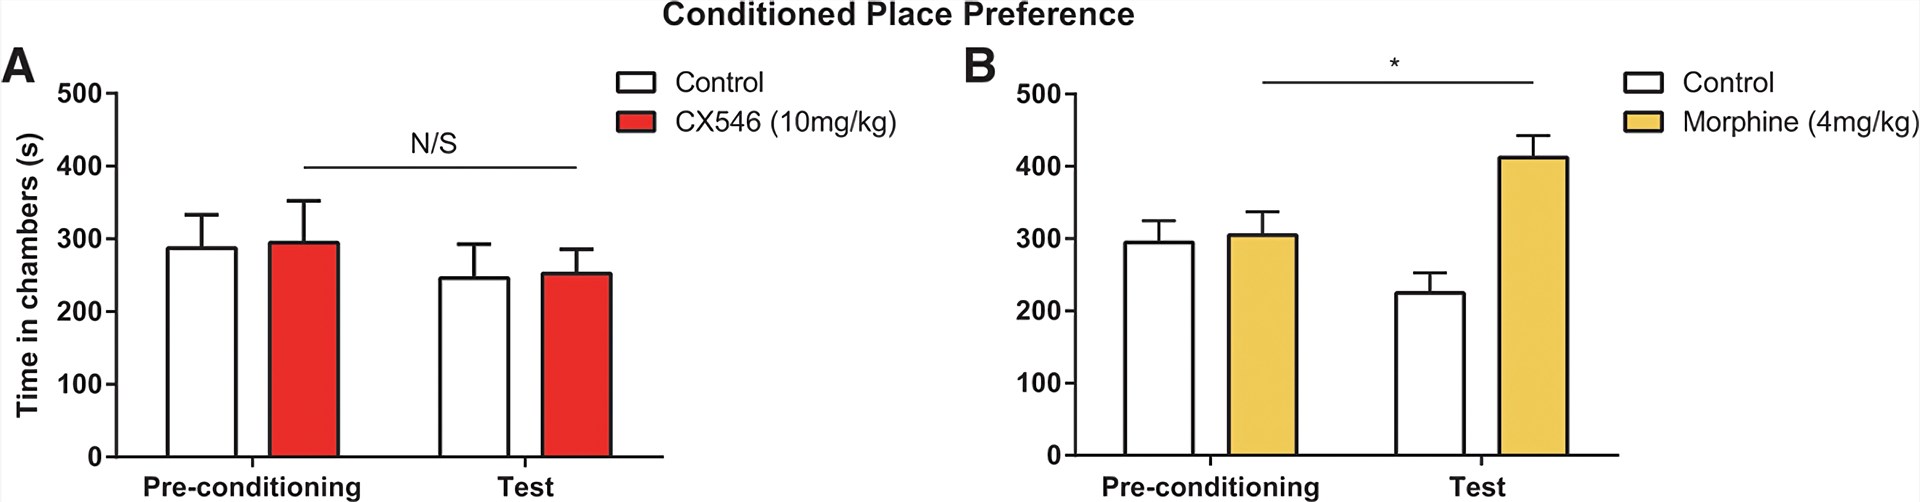 Conditioned Place Preference